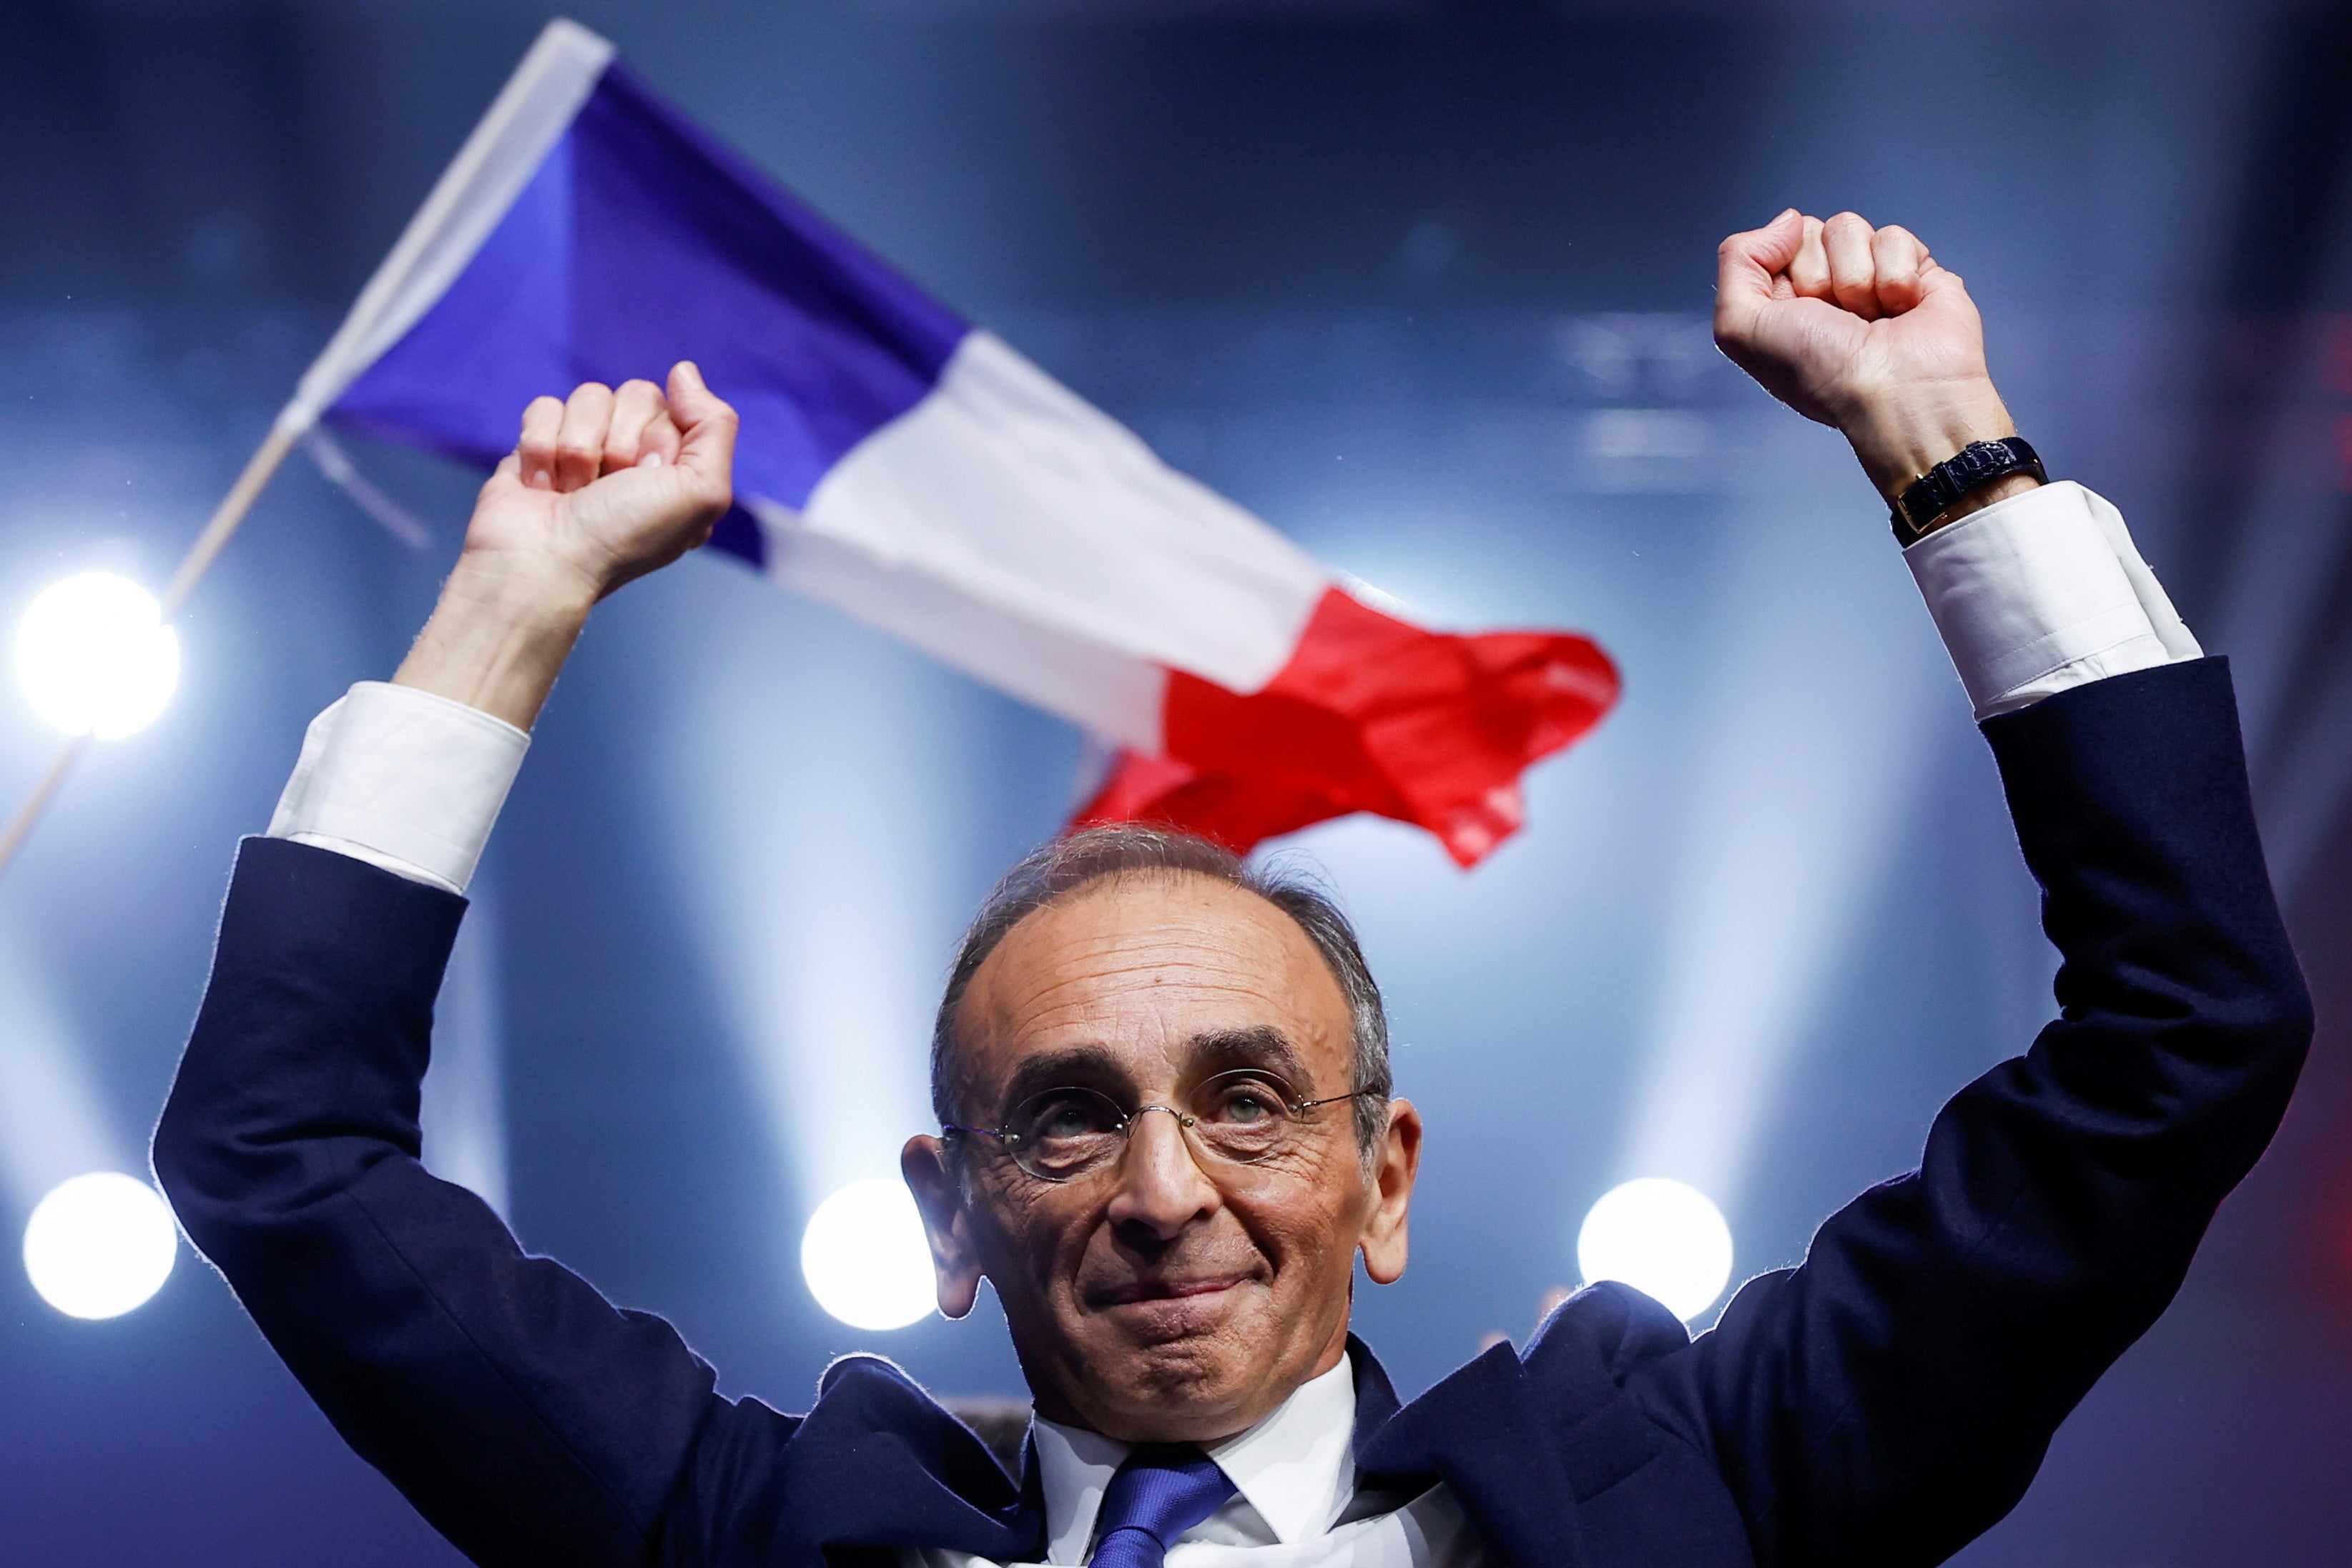 French far-right commentator Eric Zemmour, at the attends rally in Villepinte near Paris